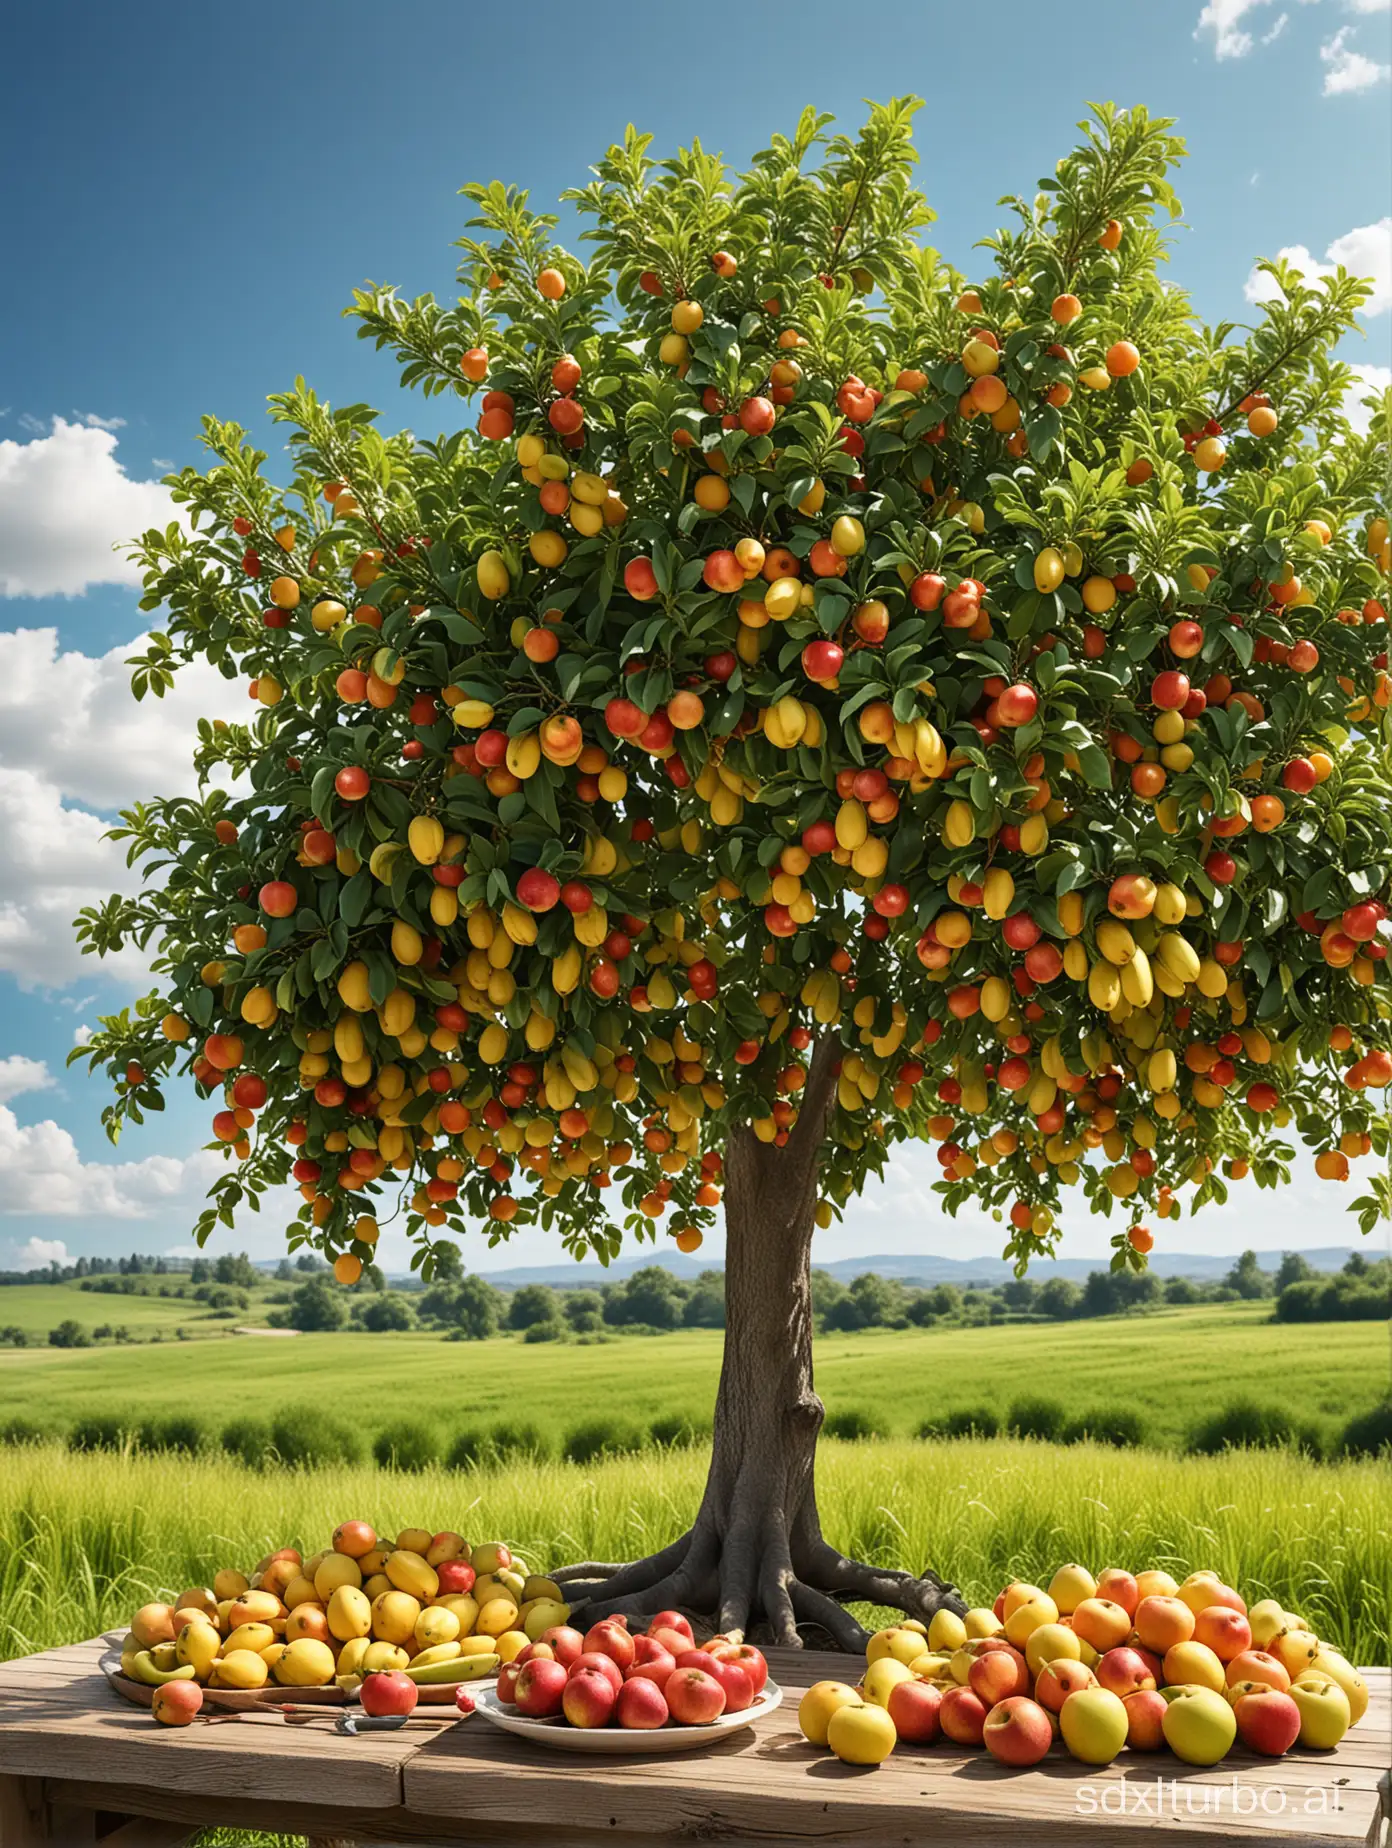 Vibrant-Fruit-Tree-ECommerce-Background-Harvest-Delight-with-Lush-Fruits-and-Sunlit-Meadow